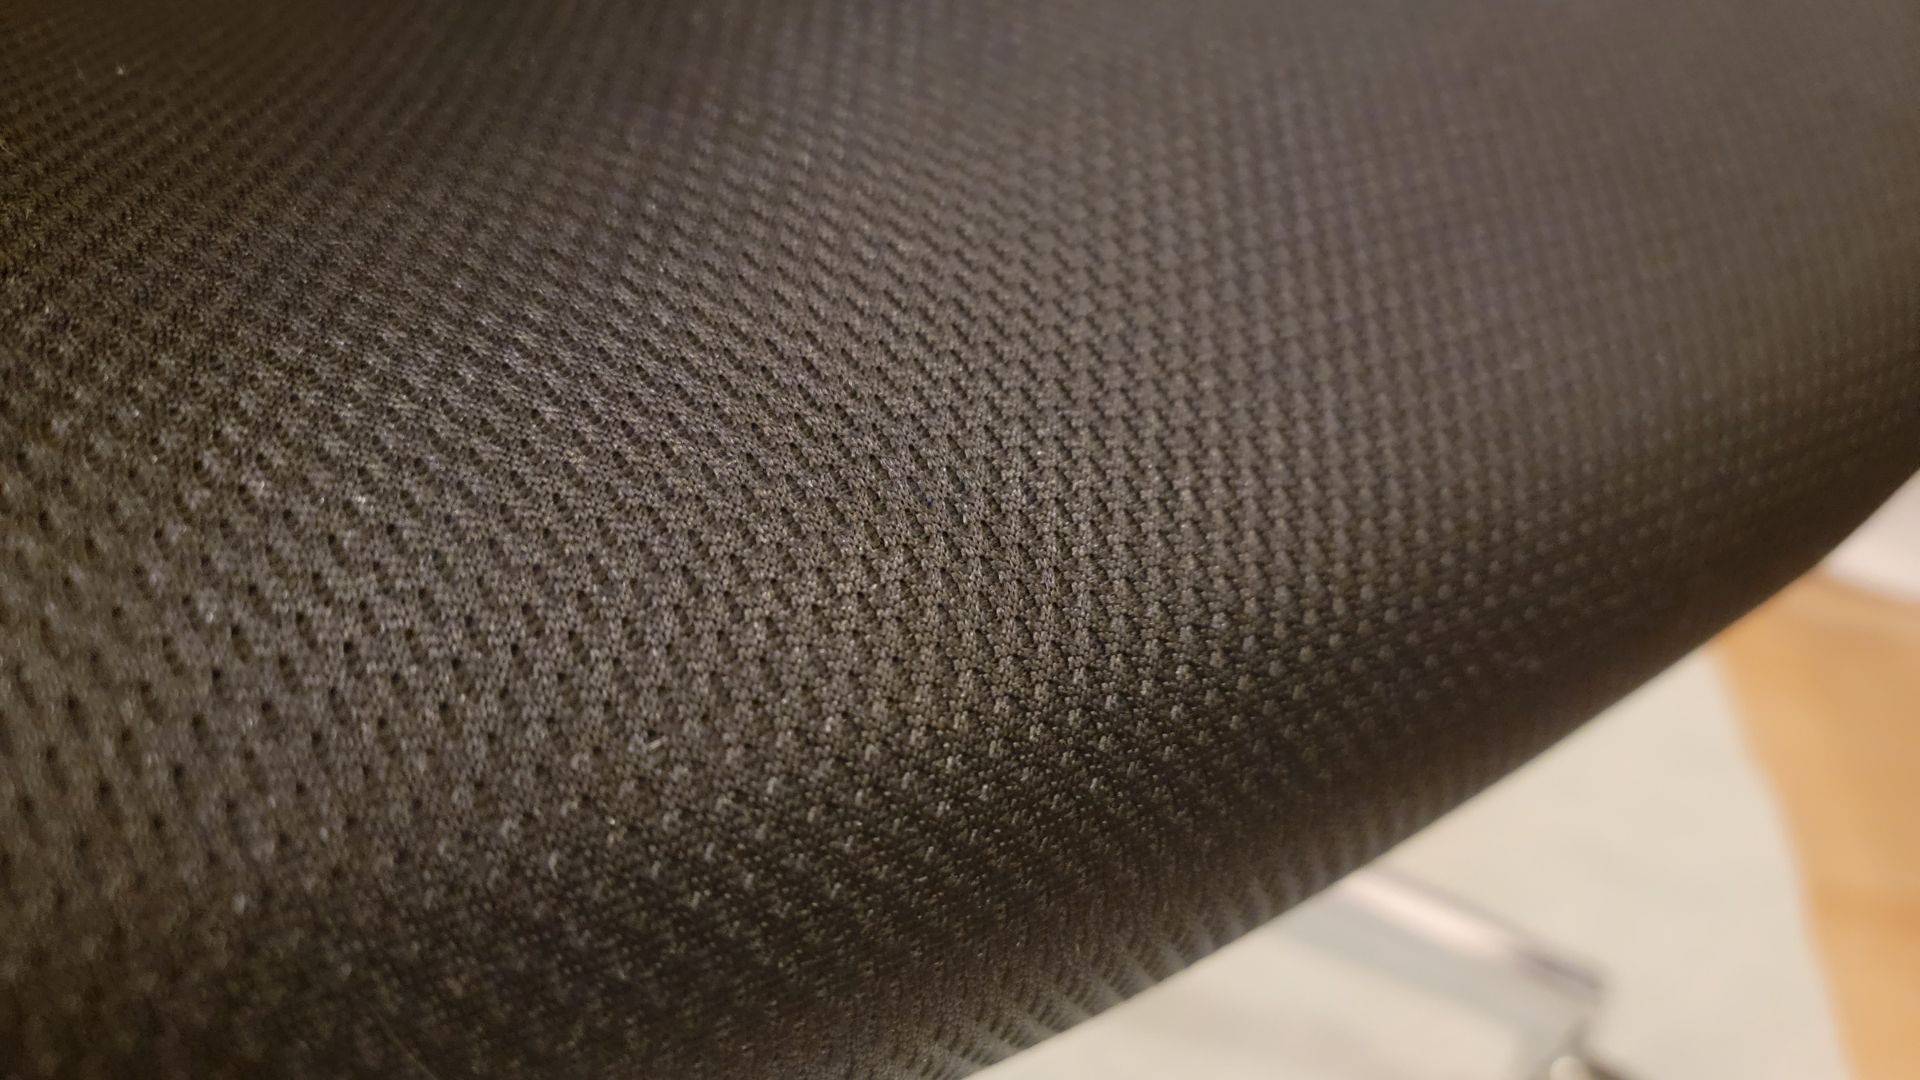 Closeup of the mesh seat of the SIHOO M18 office chair